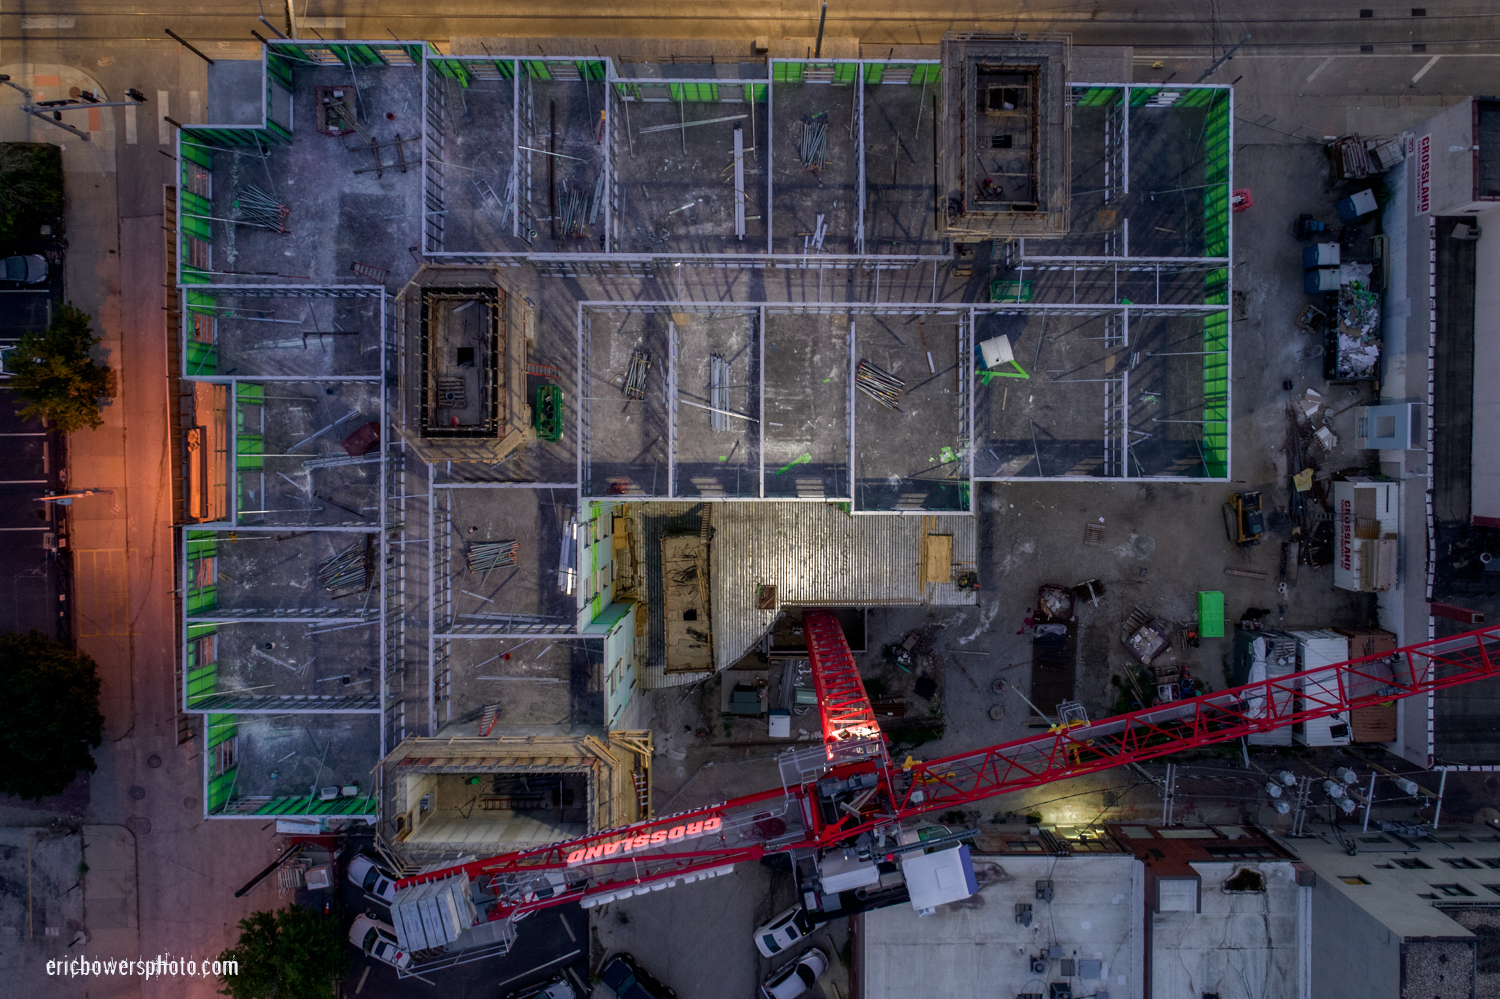 Flying Camera Above Kansas City Construction Site OR A Flying Camera Above Central Bank Quantitative Easing; A new-fangled Hampton Inn at approx. 16th and Main, Kansas City, Missouri; post foundational yet pre-roofing. Summer 2018. 